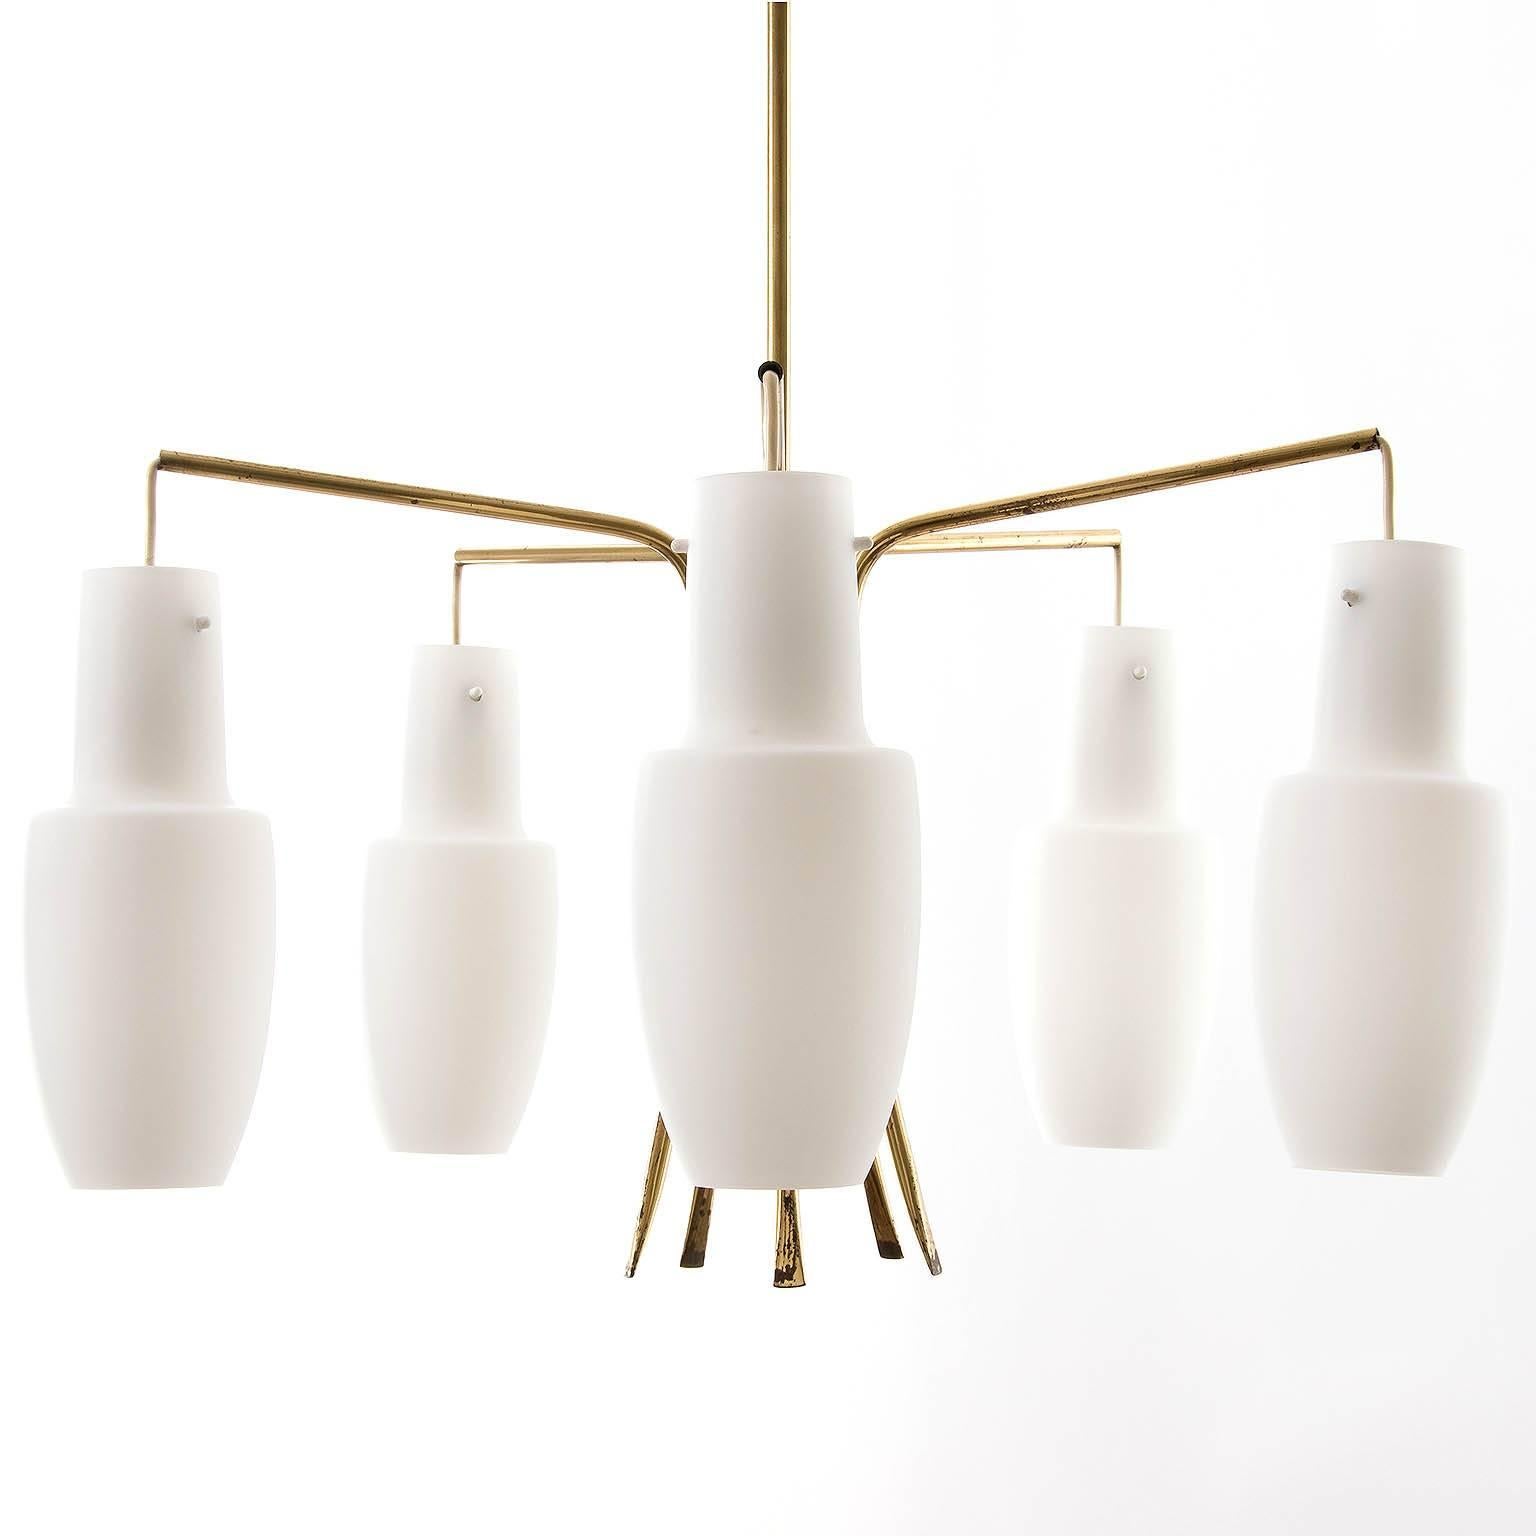 An Austrian pendant light fixture by Rupert Nikoll, manufactured in Mid-Century, circa 1960 (late 1950s or early 1960s). White opaline glass lamp shades hang on a five-arm brass frame. The light has five sockets for E14 candelabra screw base